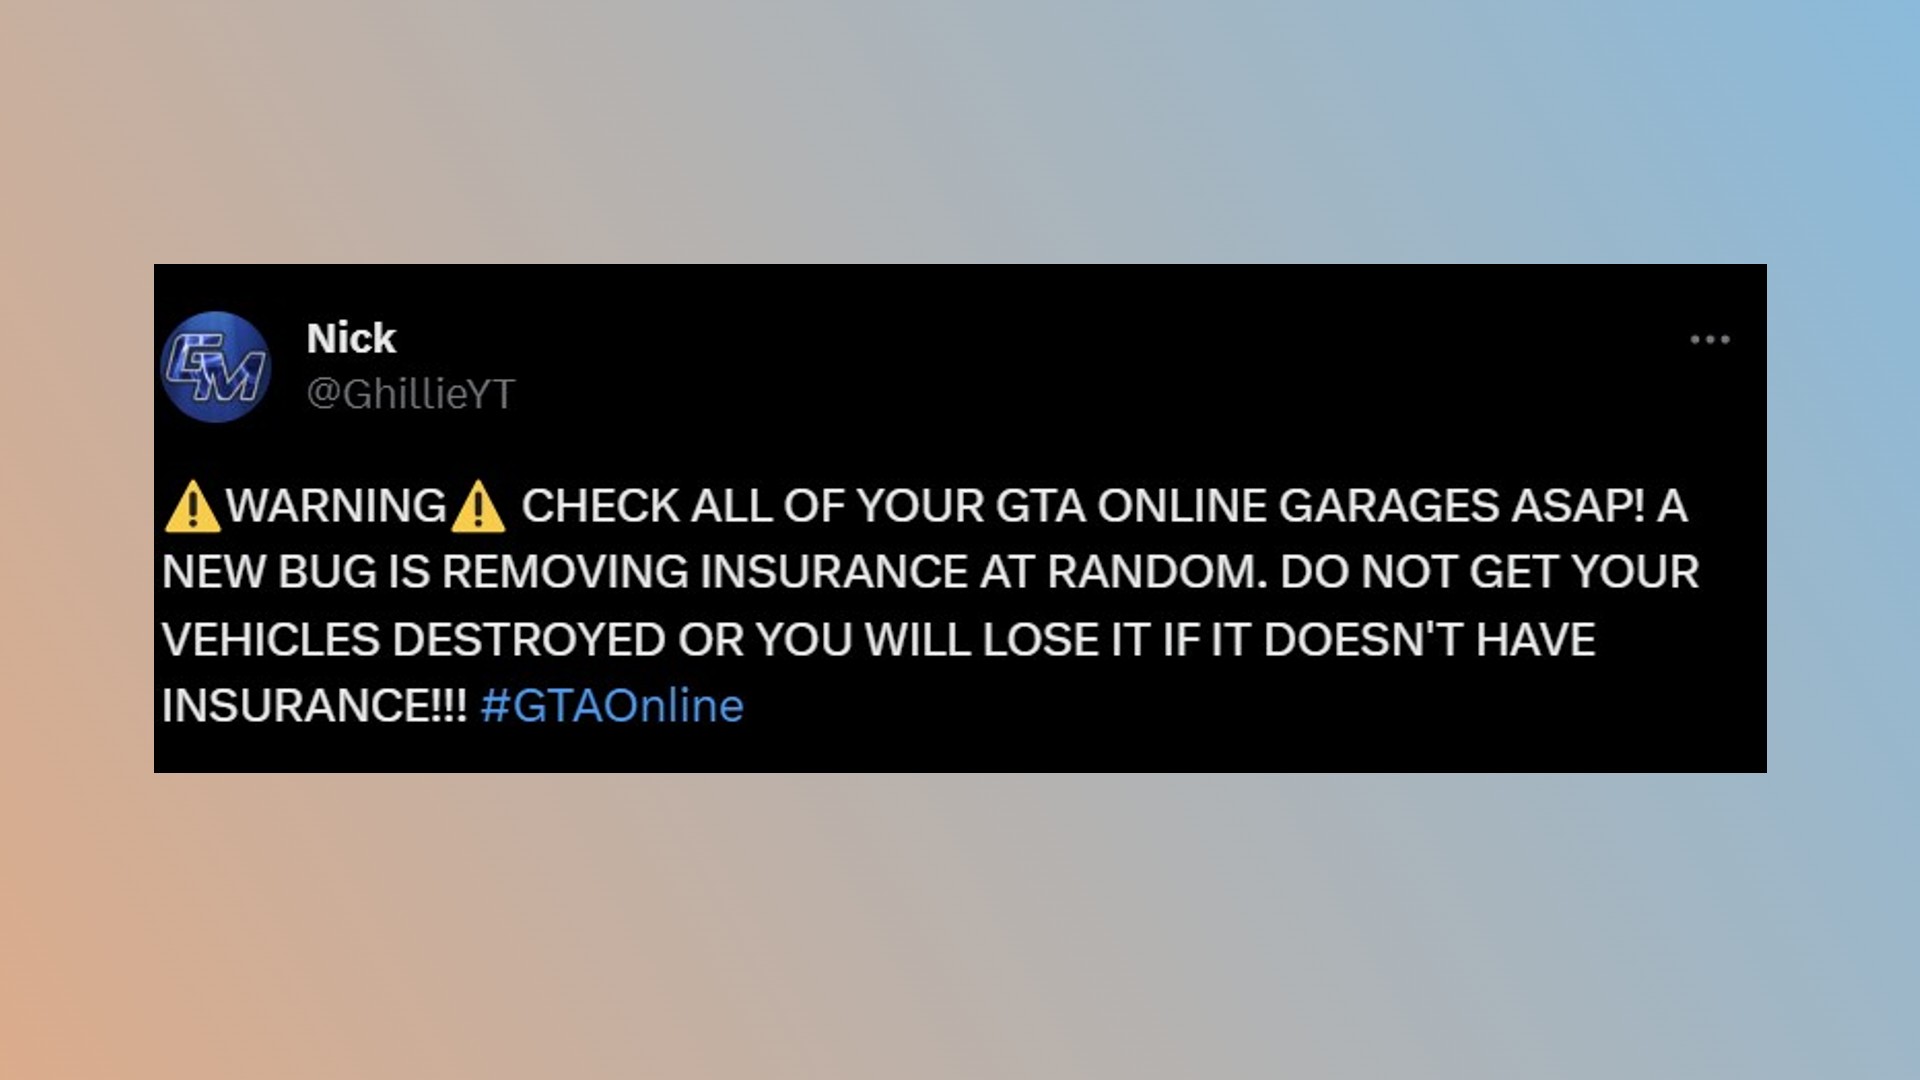 GTA 5 vehices bug: A tweet outling the insurance bug for vehicles in Rockstar sandbox game GTA 5